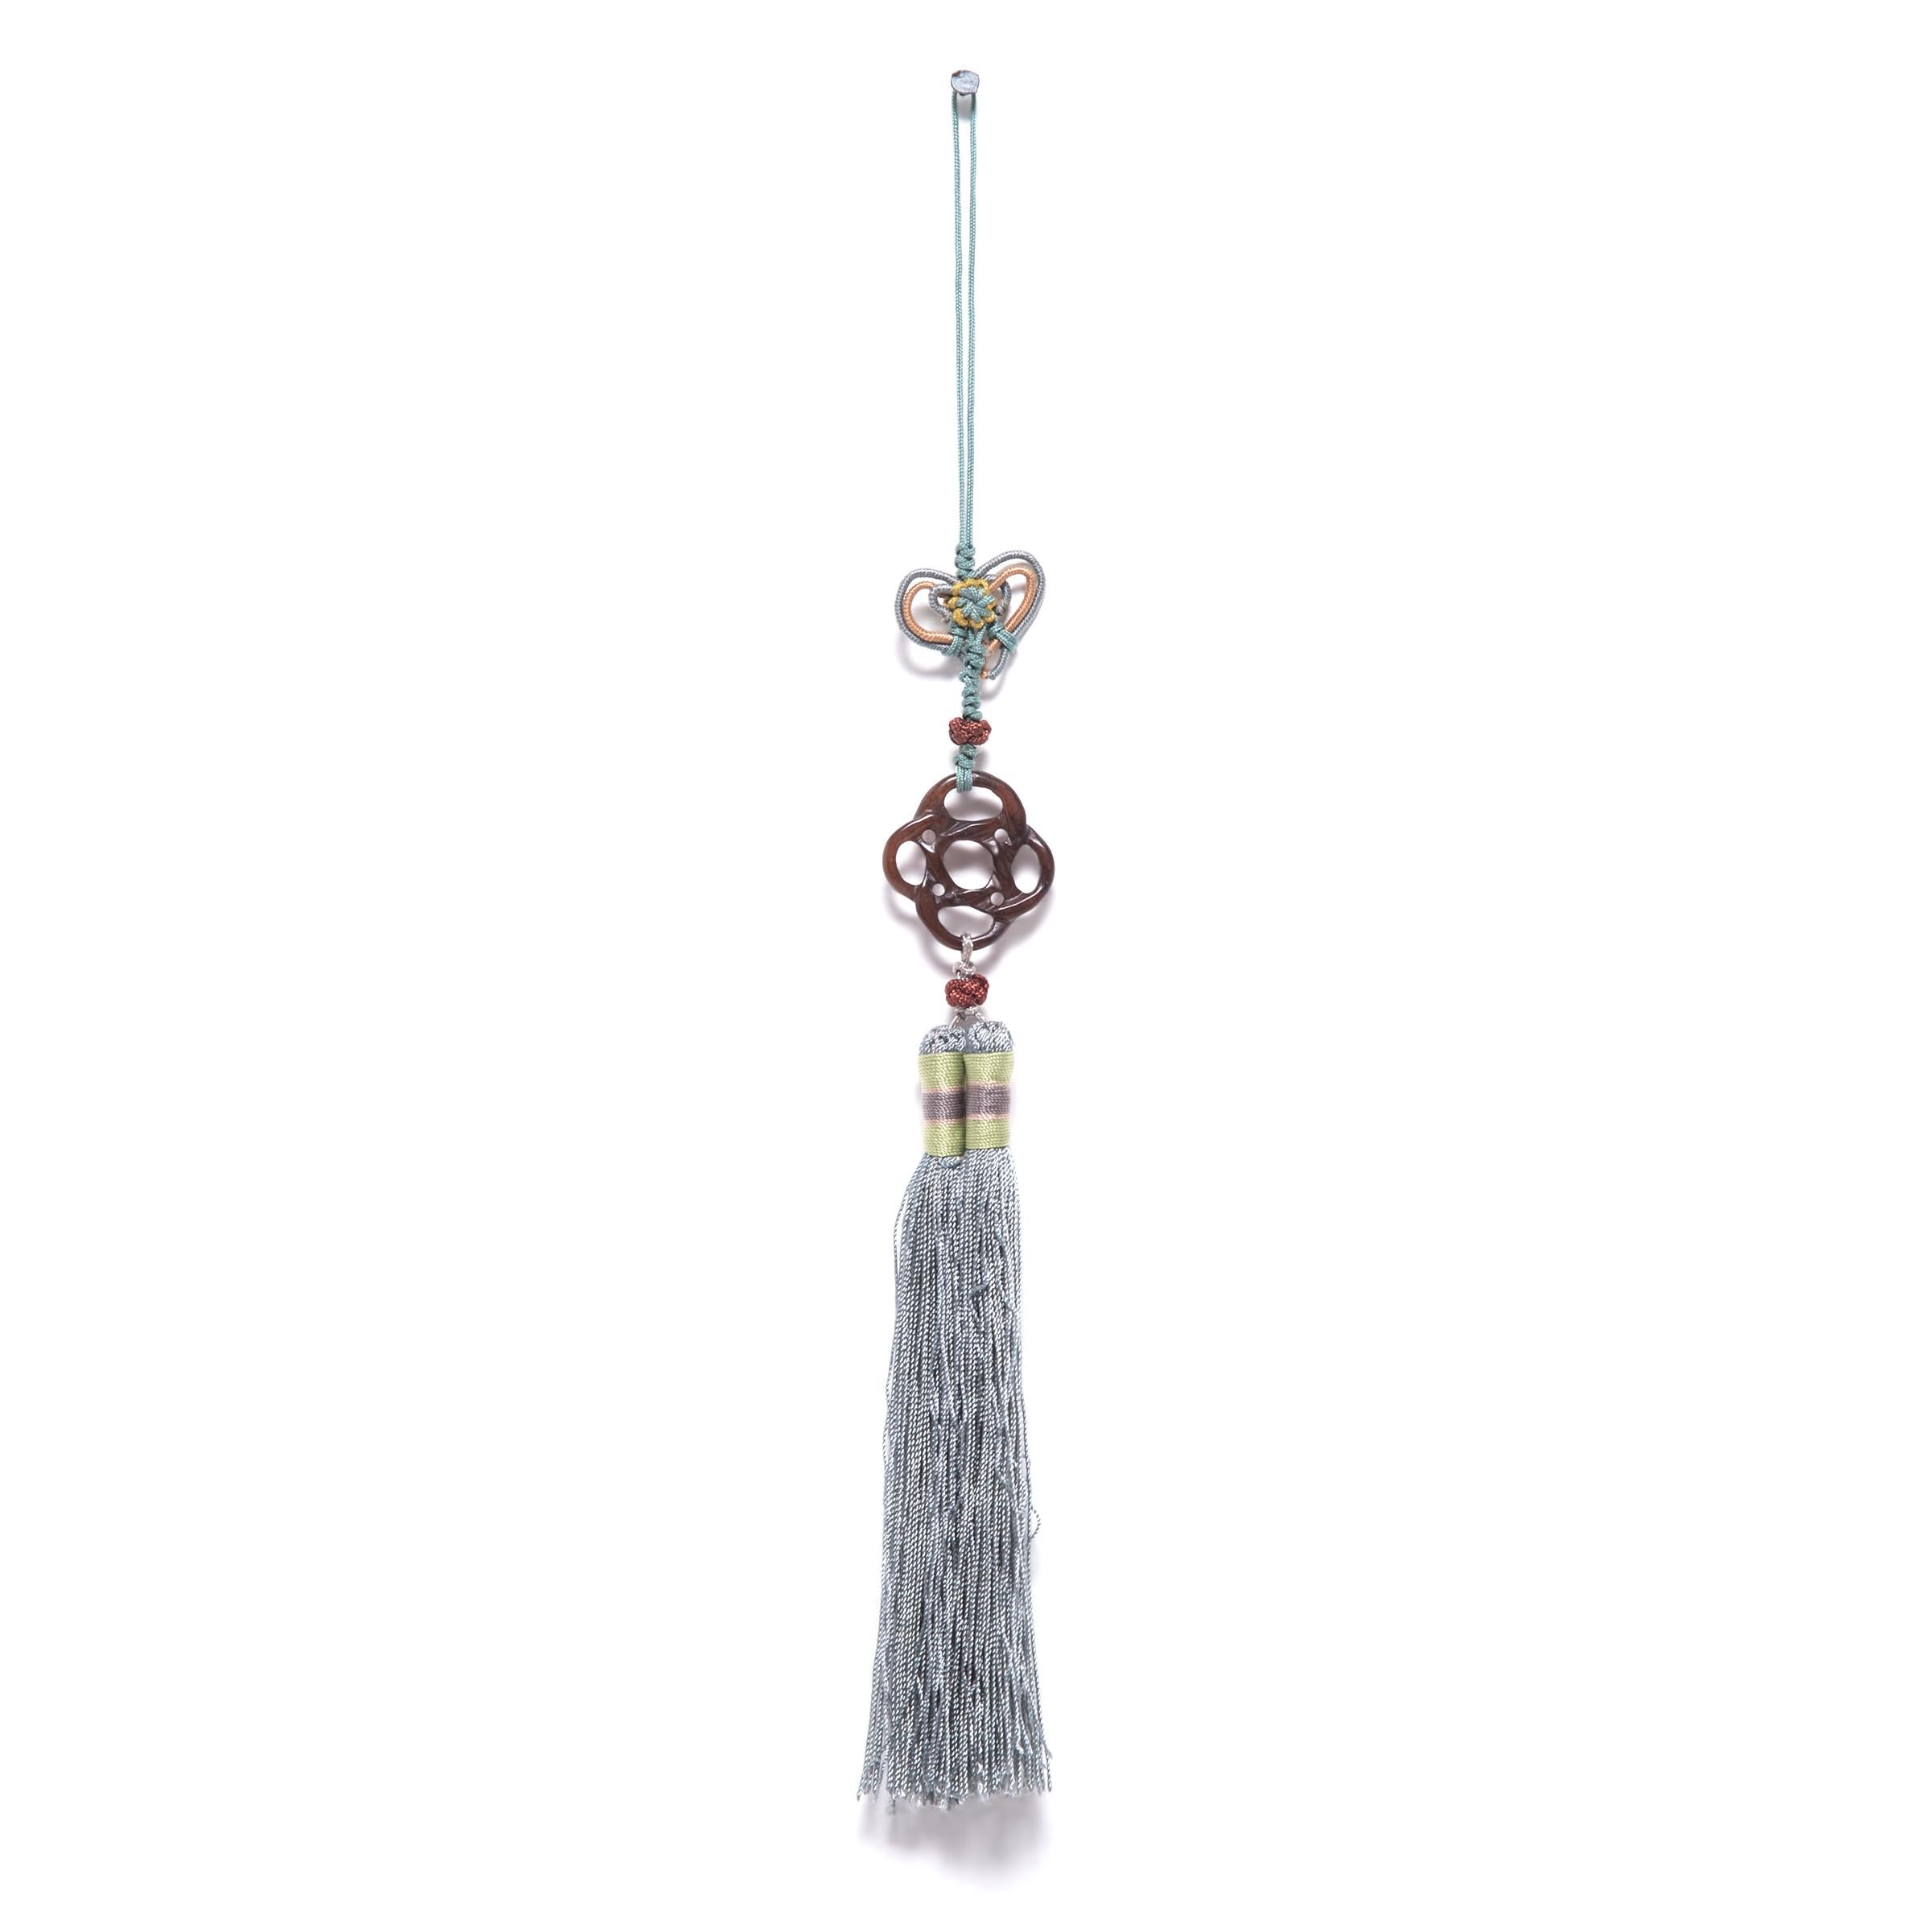 Chinese knotted tassels are used to add elegance to everyday items like hairpins or lanterns but they often hold sentimental value, and are passed down through families for generations. In ancient times lovers sometimes gave knots as tokens of their